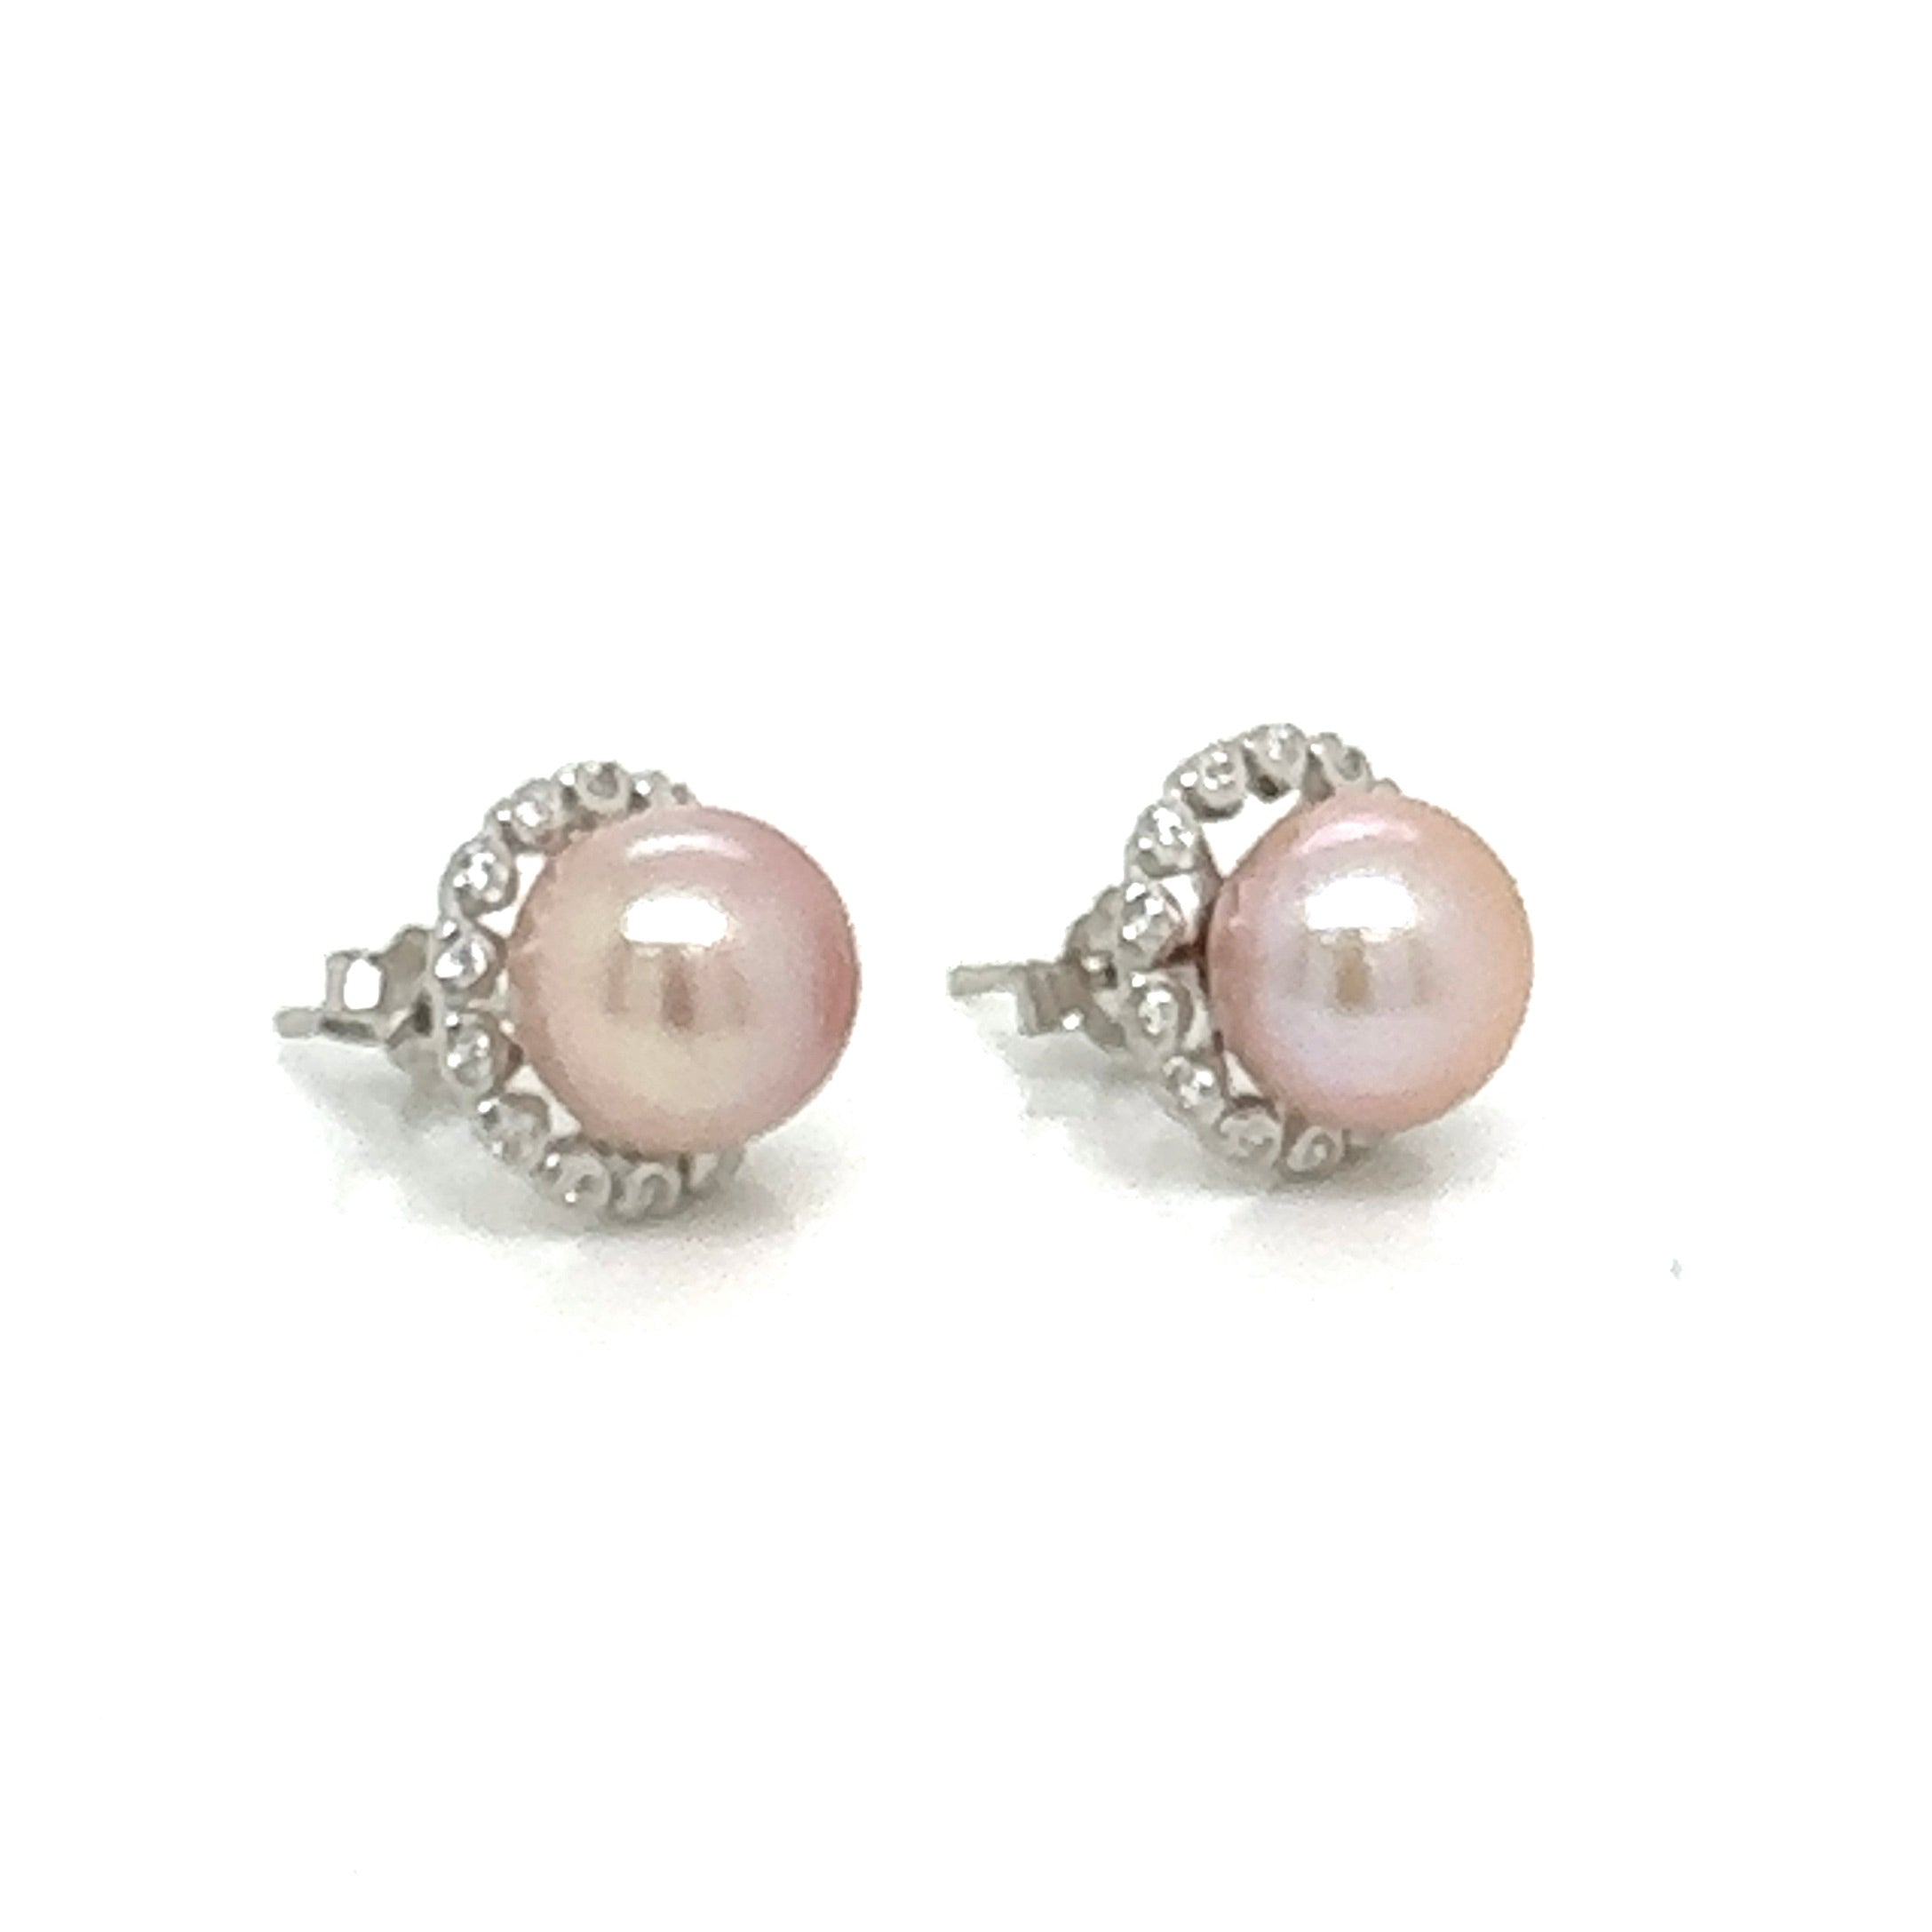 Pink pearl earrings with bling